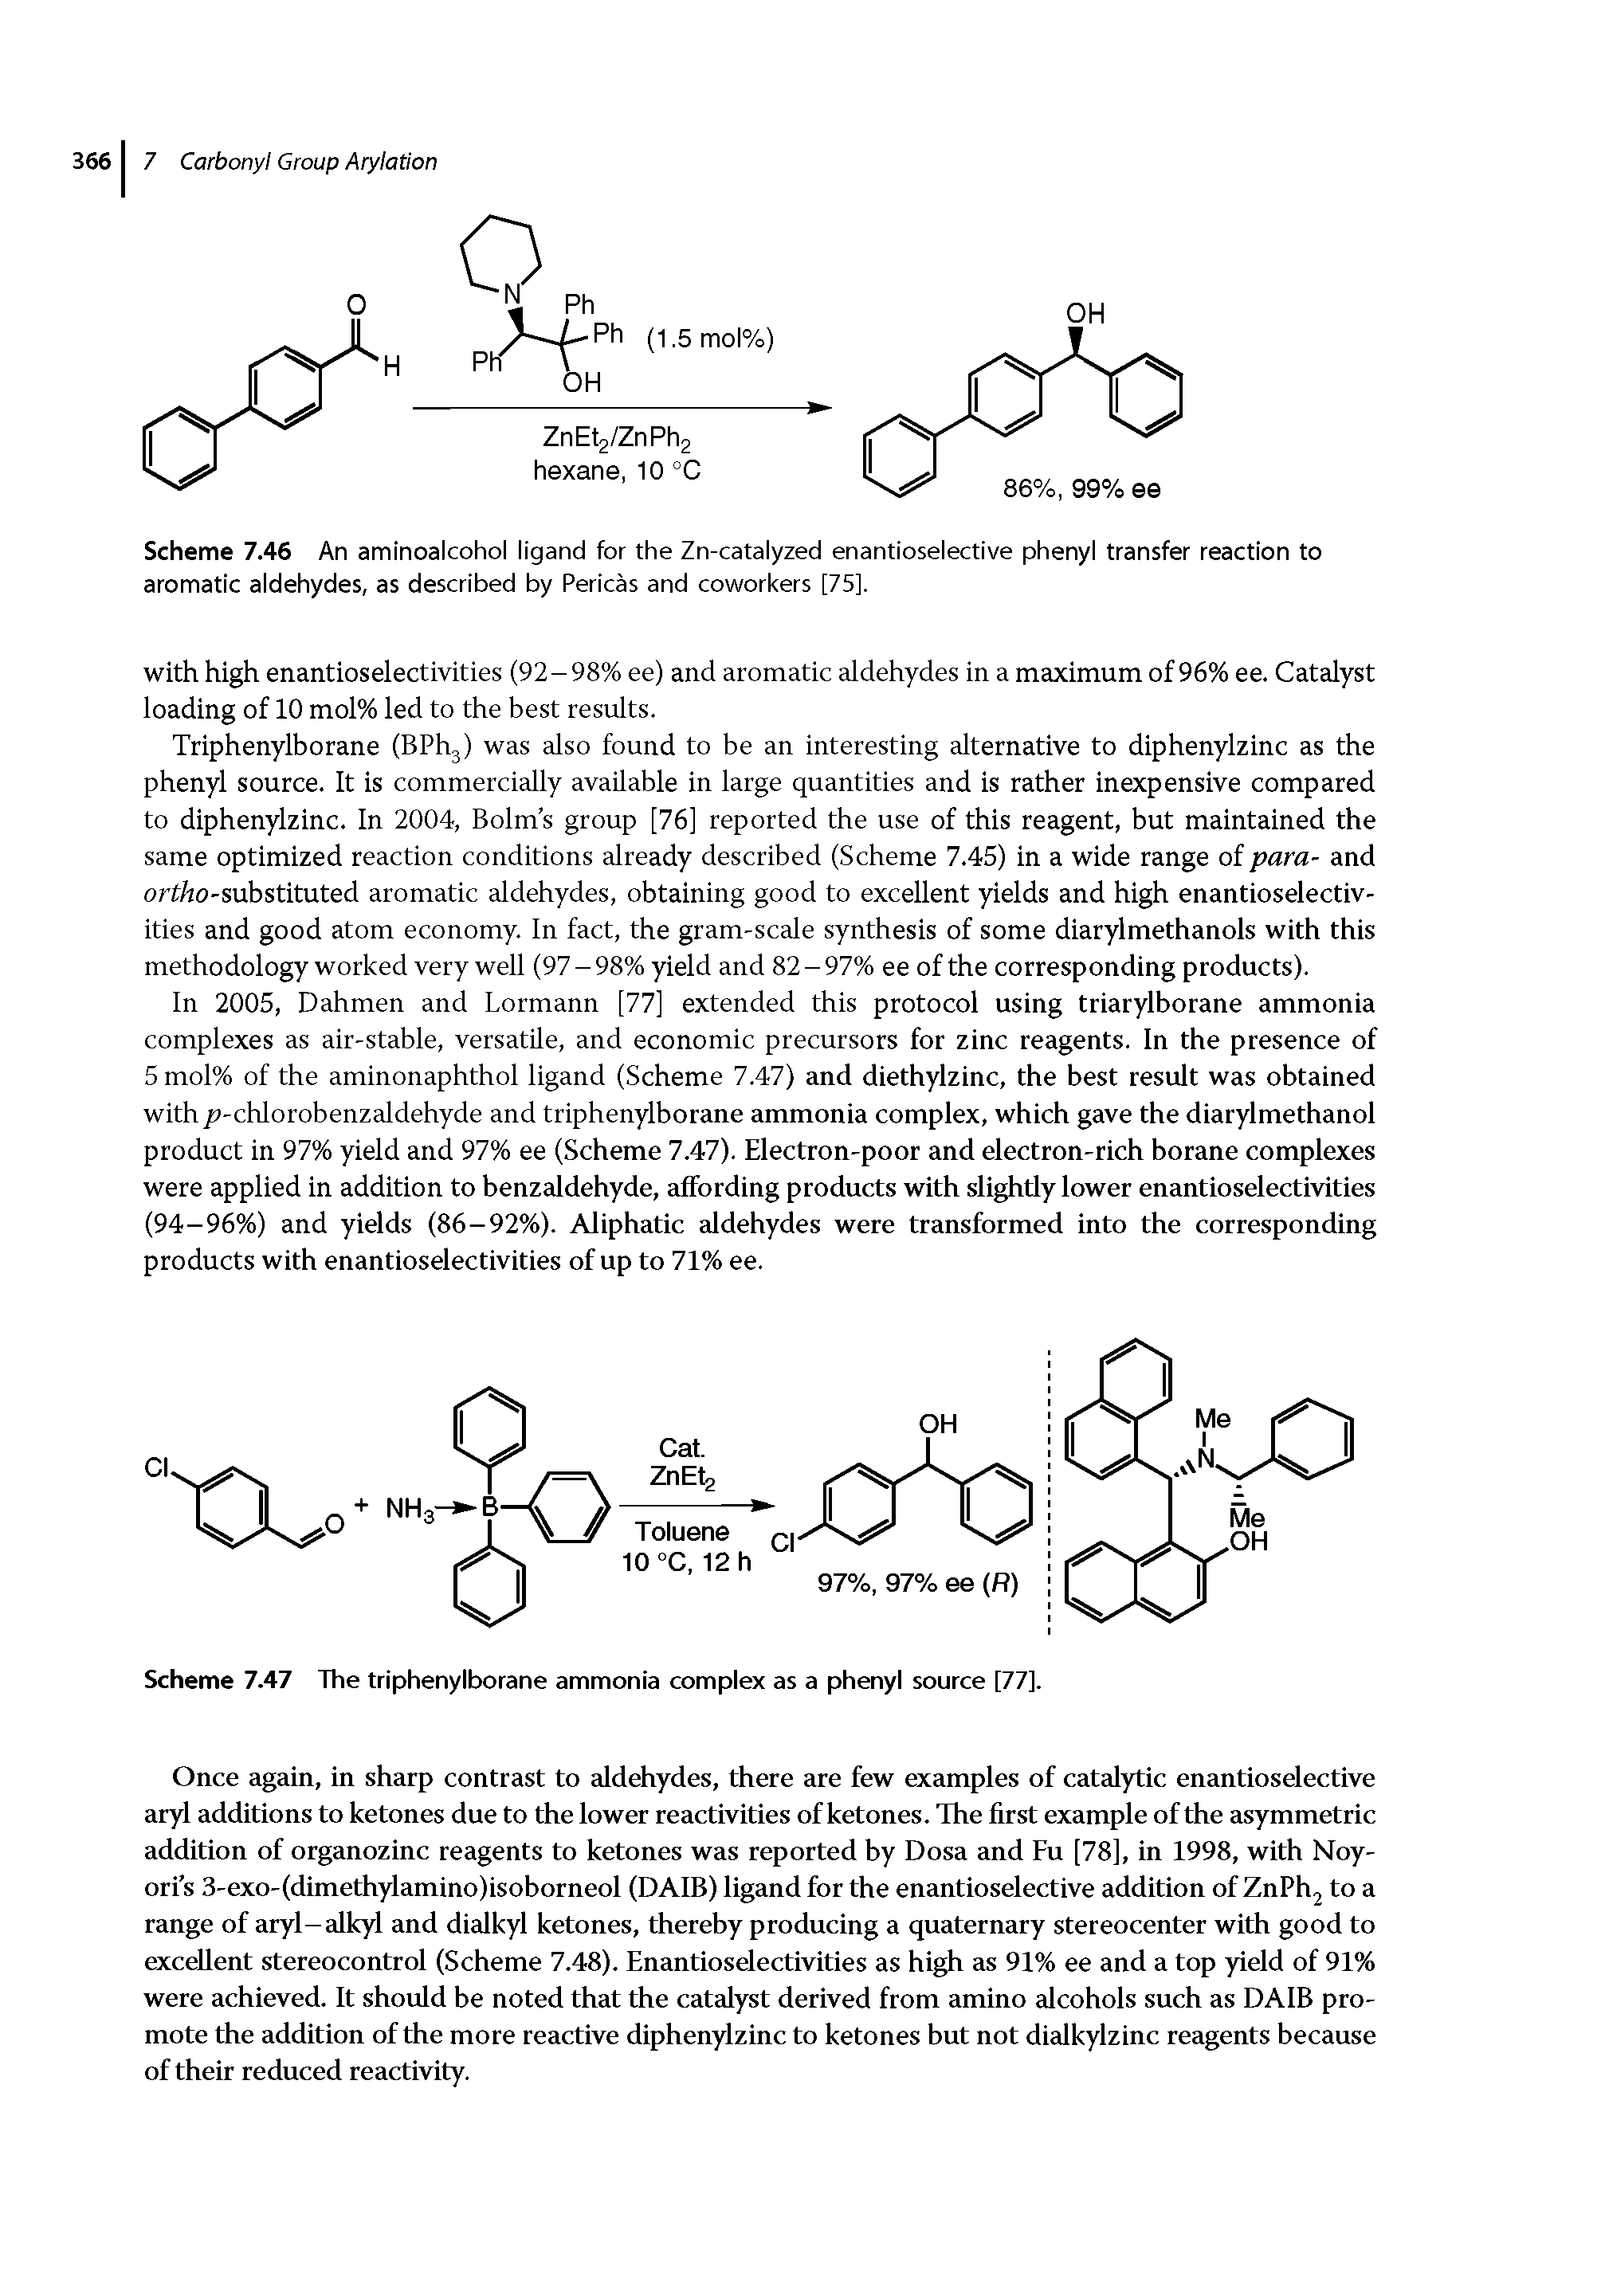 Scheme 7.46 An aminoalcohol ligand for the Zn-catalyzed enantioselective phenyl transfer reaction to aromatic aldehydes, as described by Pericas and coworkers [75].